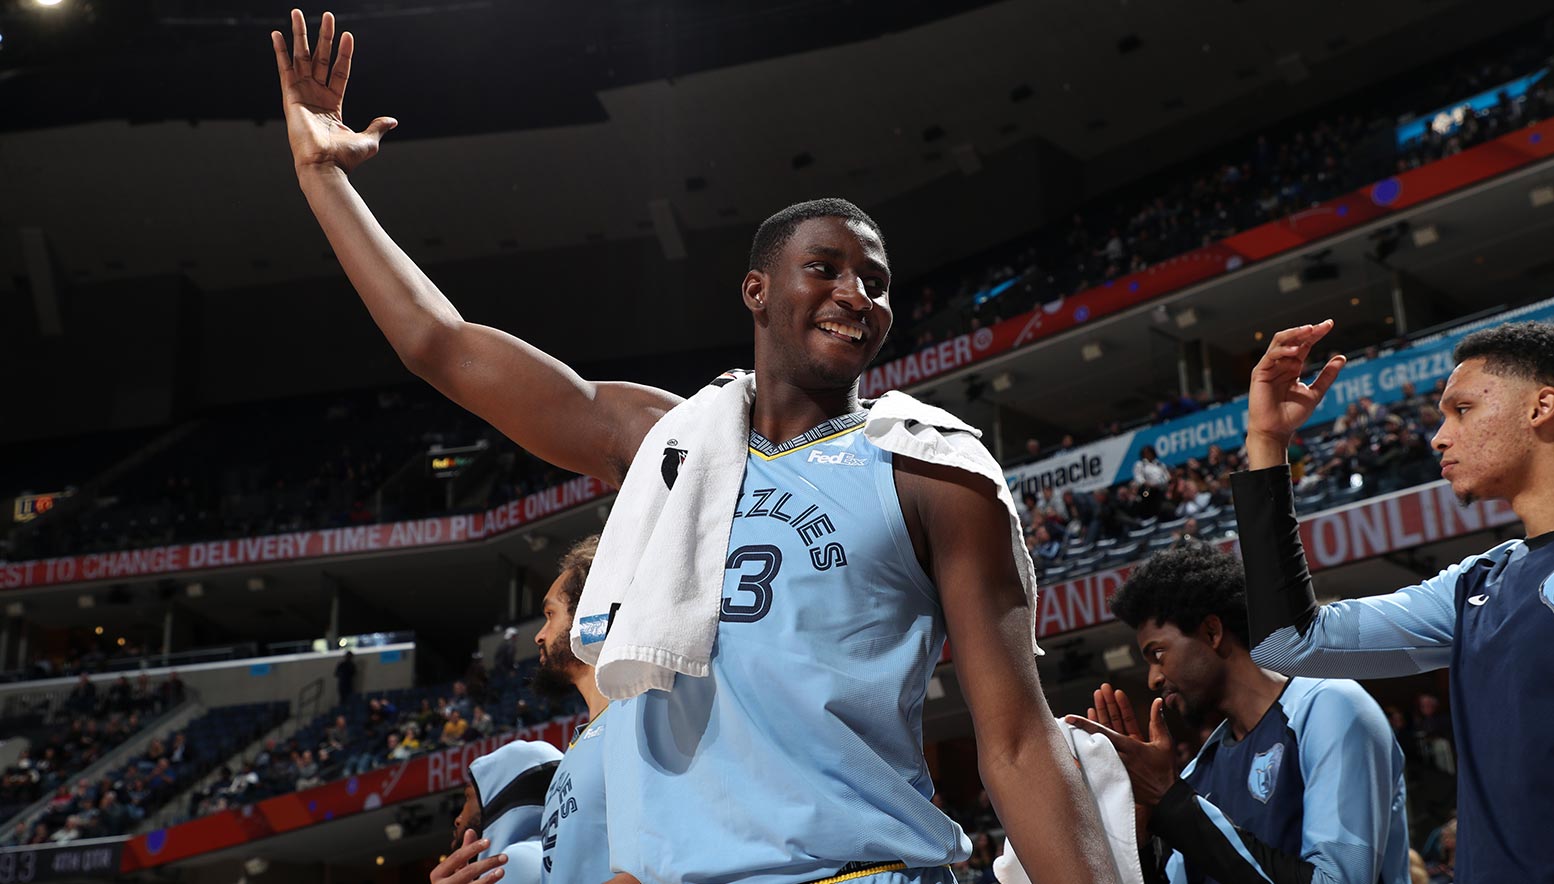 MikeCheck: As NBA Draft looms, Jaren Jackson Jr. reflects on first-year Grizz journey and shares rookie cheat code with top incoming prospects